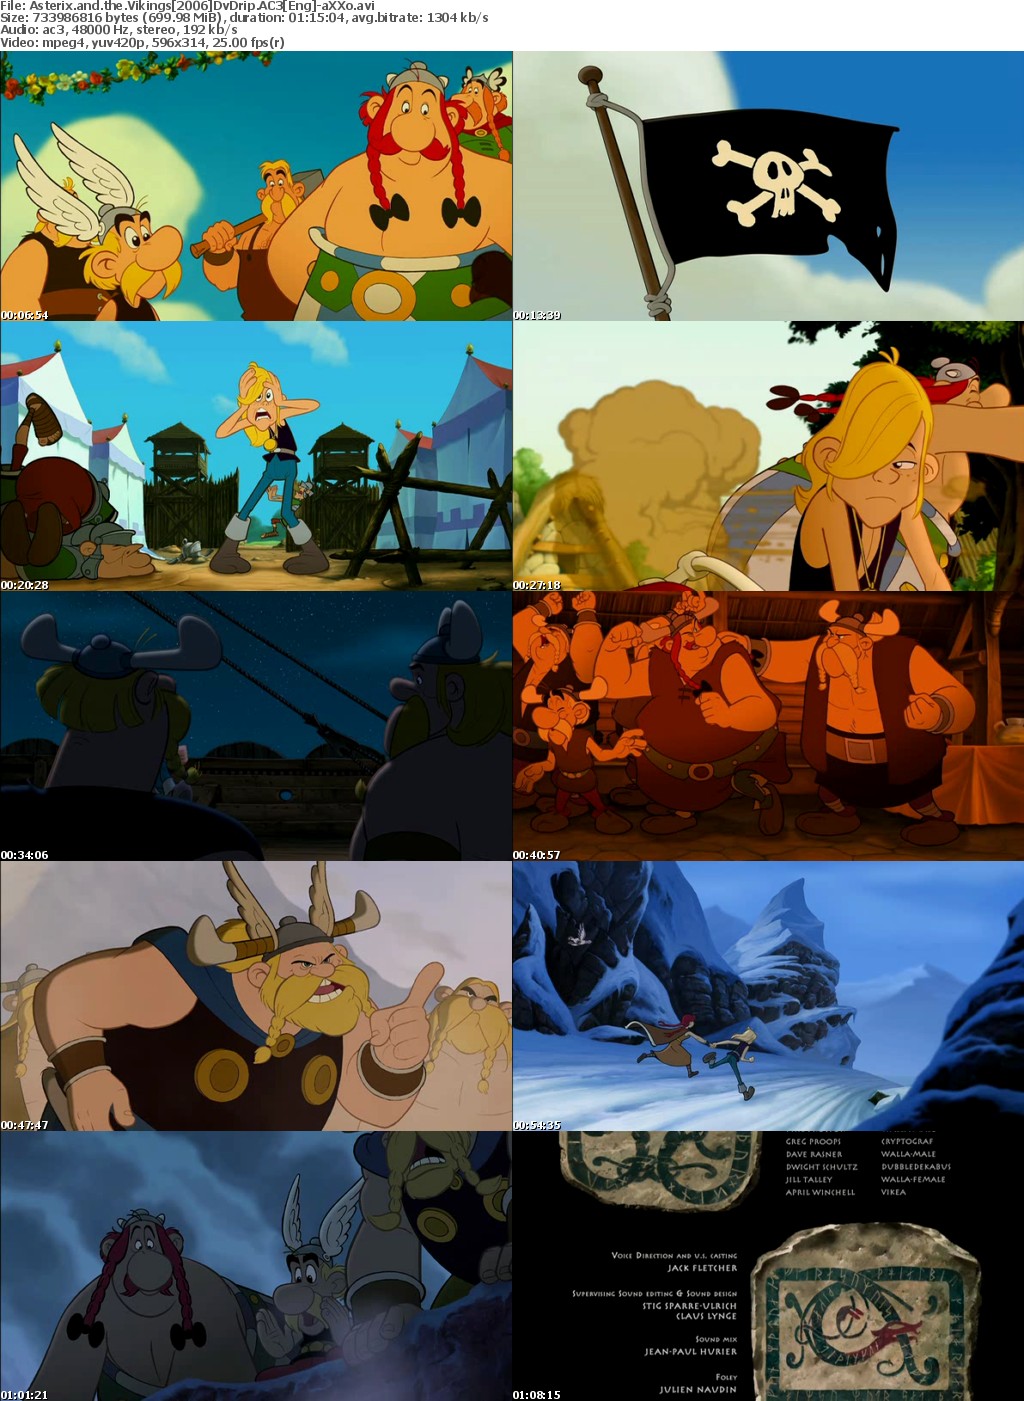 Asterix and the Vikings 2006 DvDrip AC3 Eng -aXXo